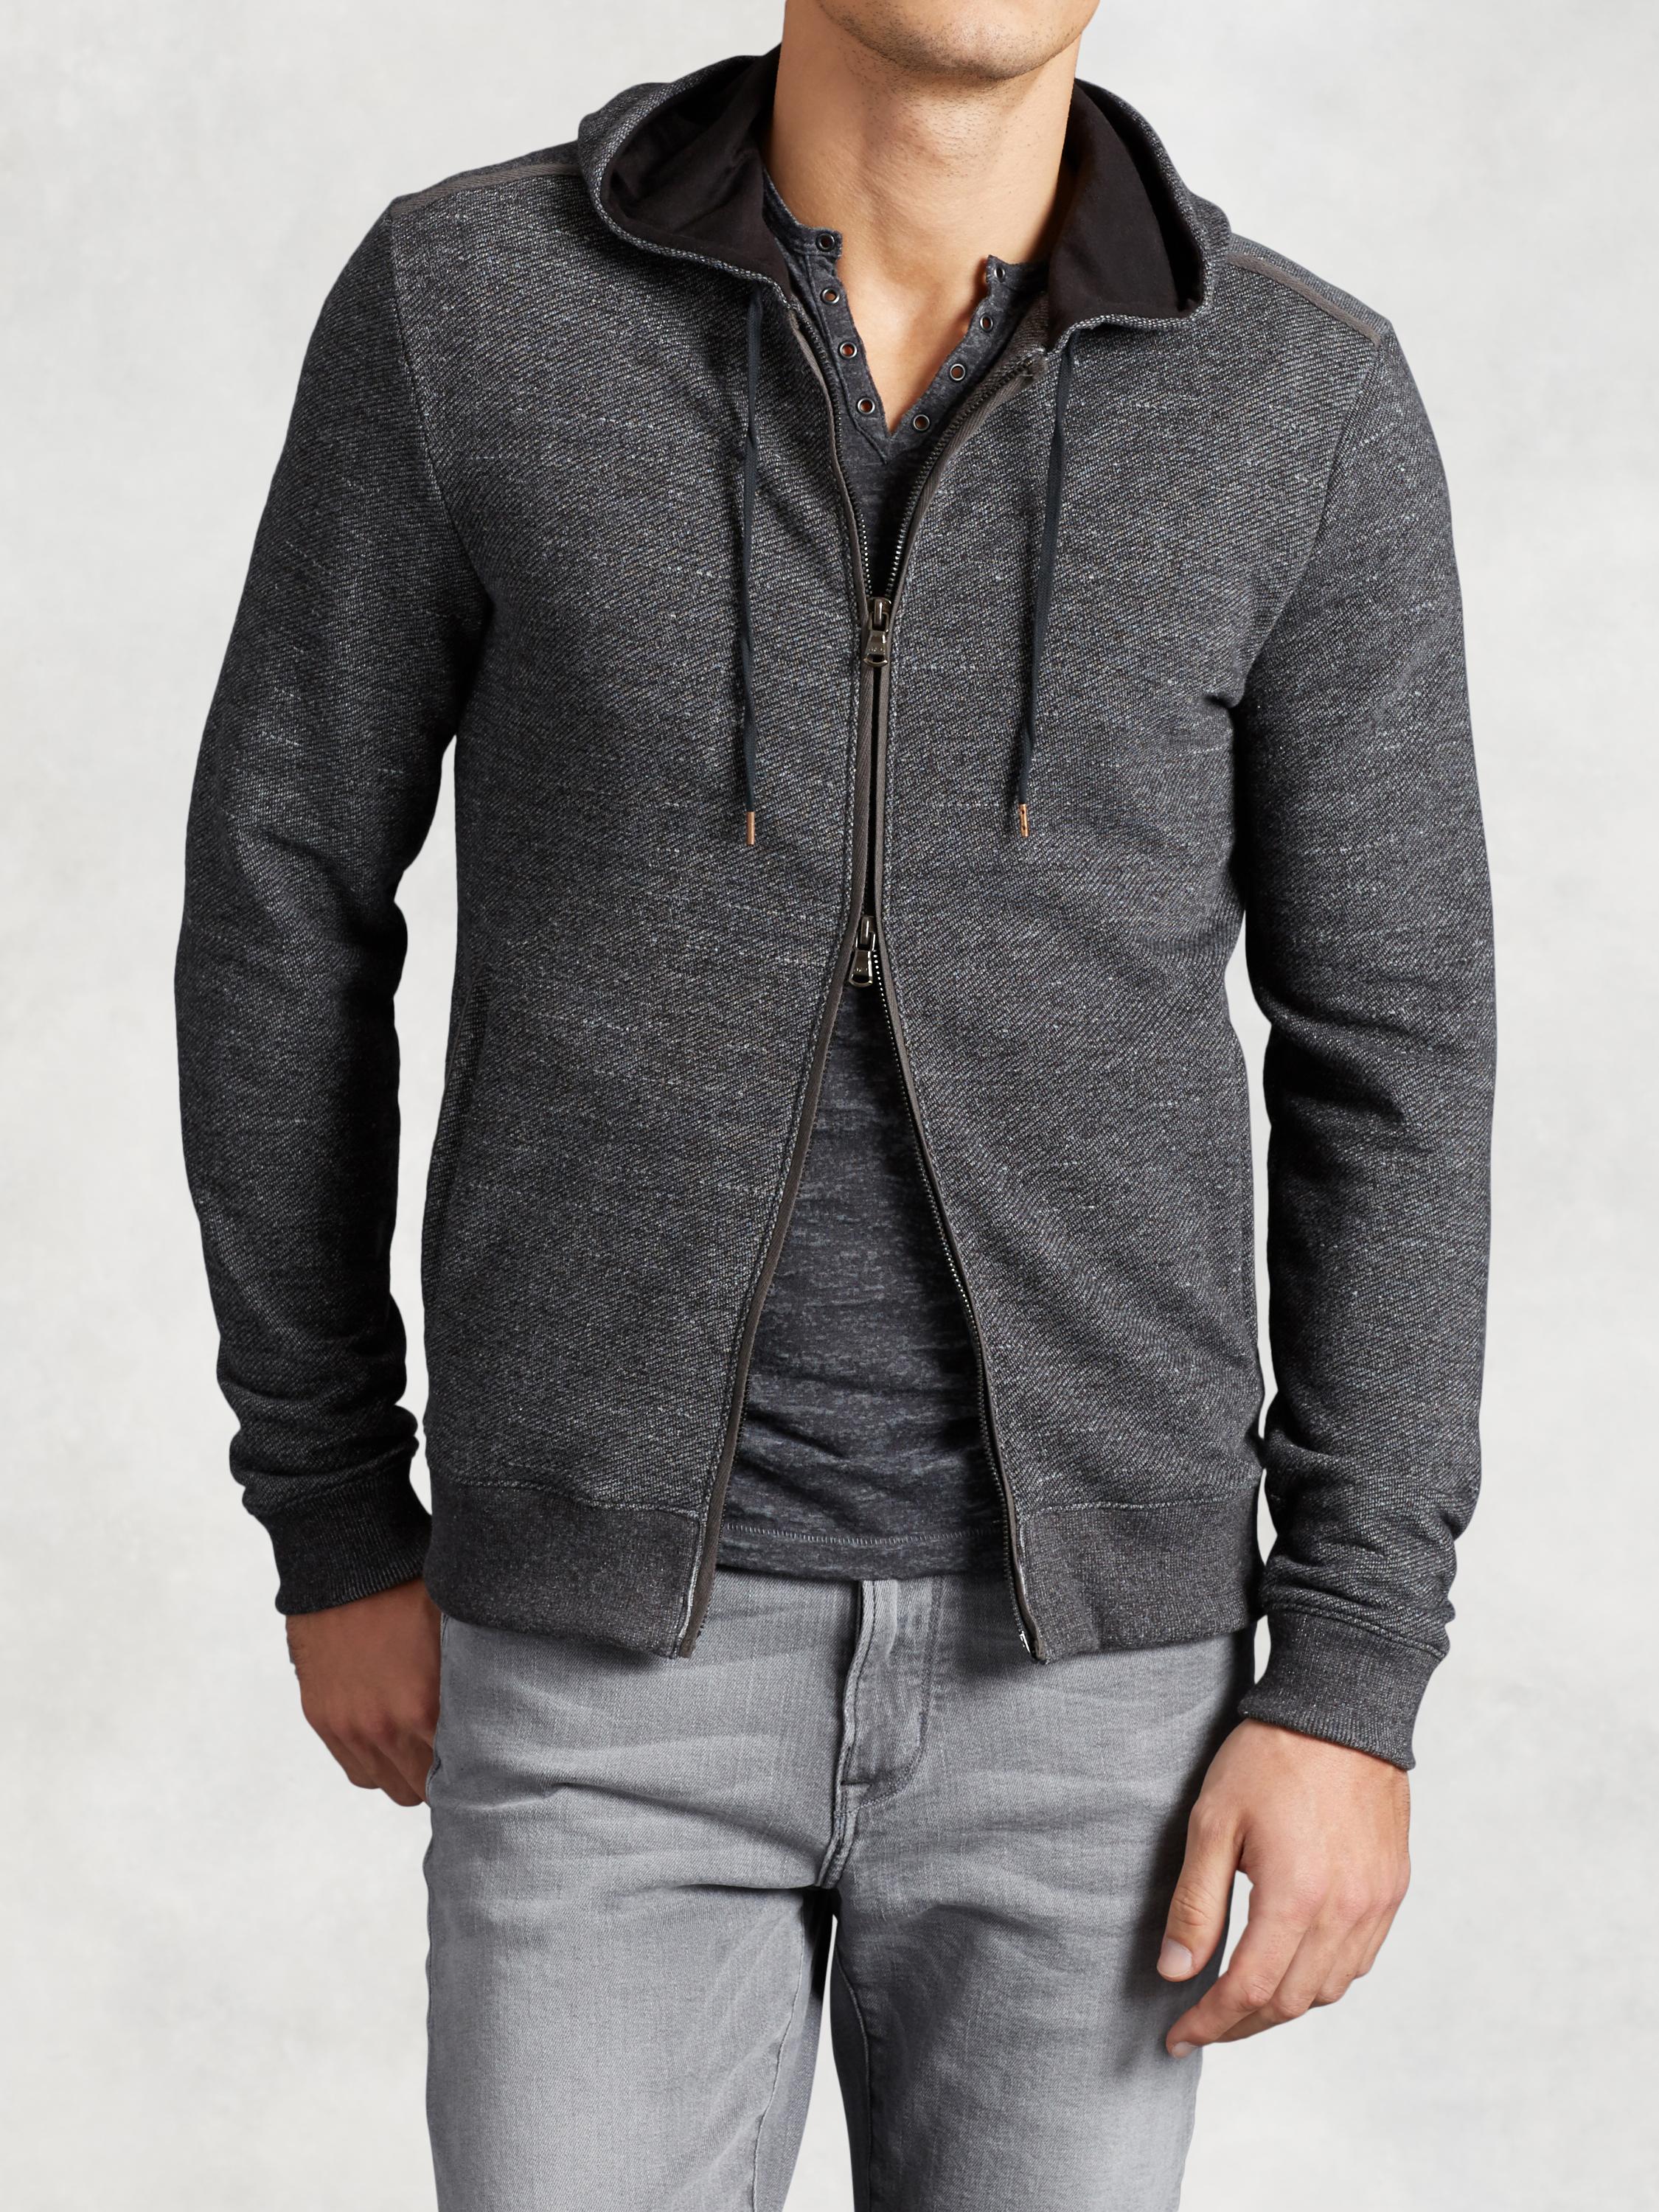 John Varvatos Mens Long Sleeve Classic Zip Front Hoodie 3 Star Embroidered